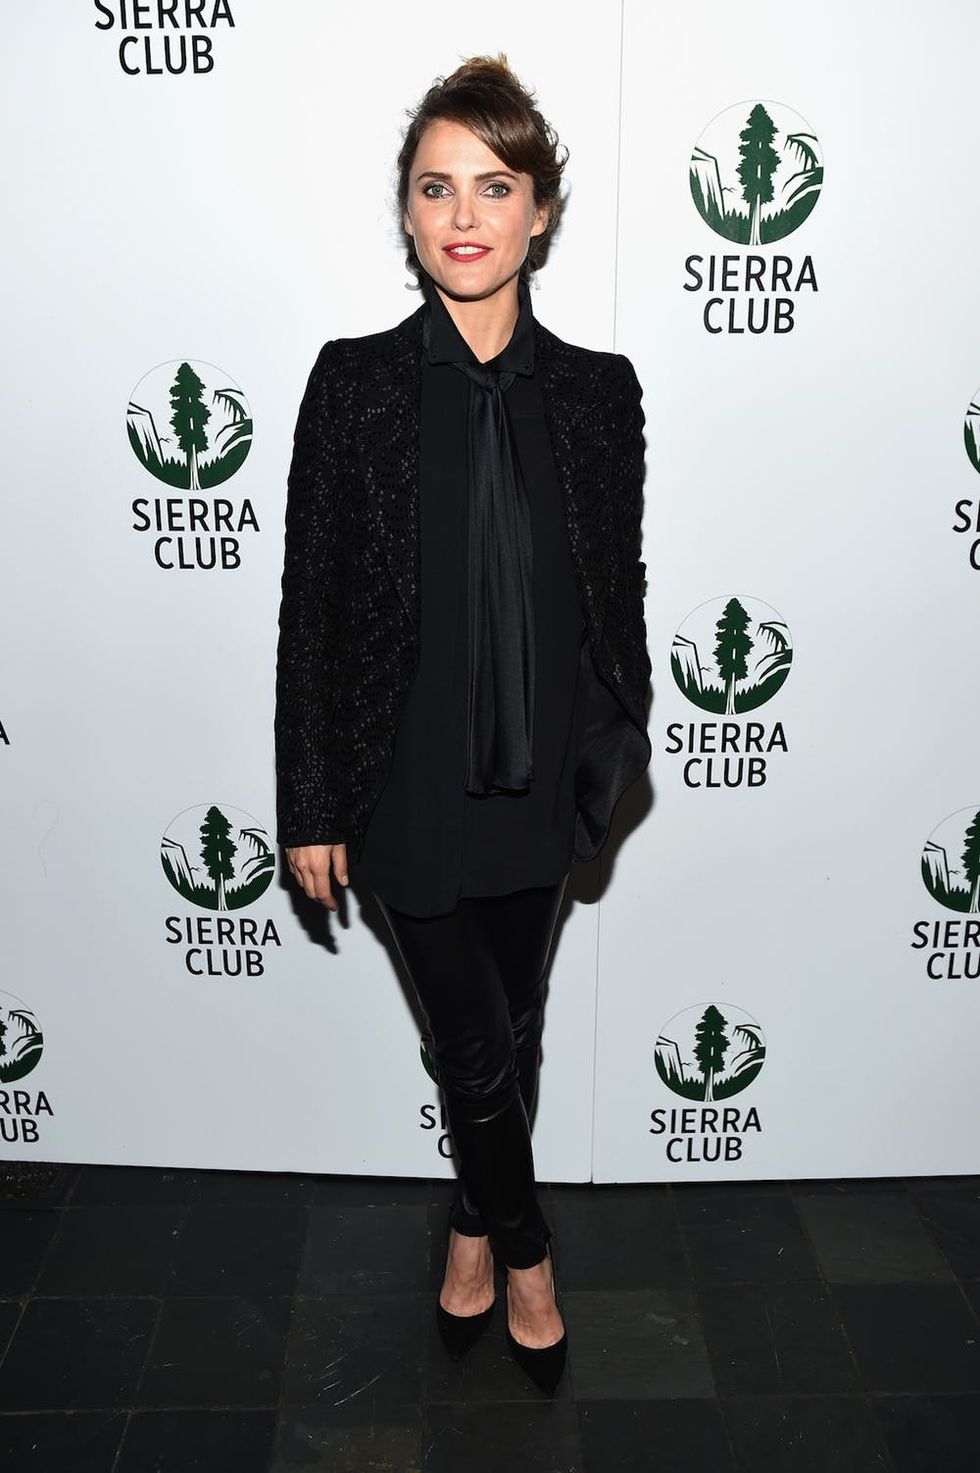 NEW YORK, NY - NOVEMBER 11: Actress Keri Russell attends Sierra Club's Act In Paris, A Night of Comedy and Climate Action at The Heath at the McKittrick Hotel on November 11, 2015 in New York City. (Photo by Nicholas Hunt/Getty Images)